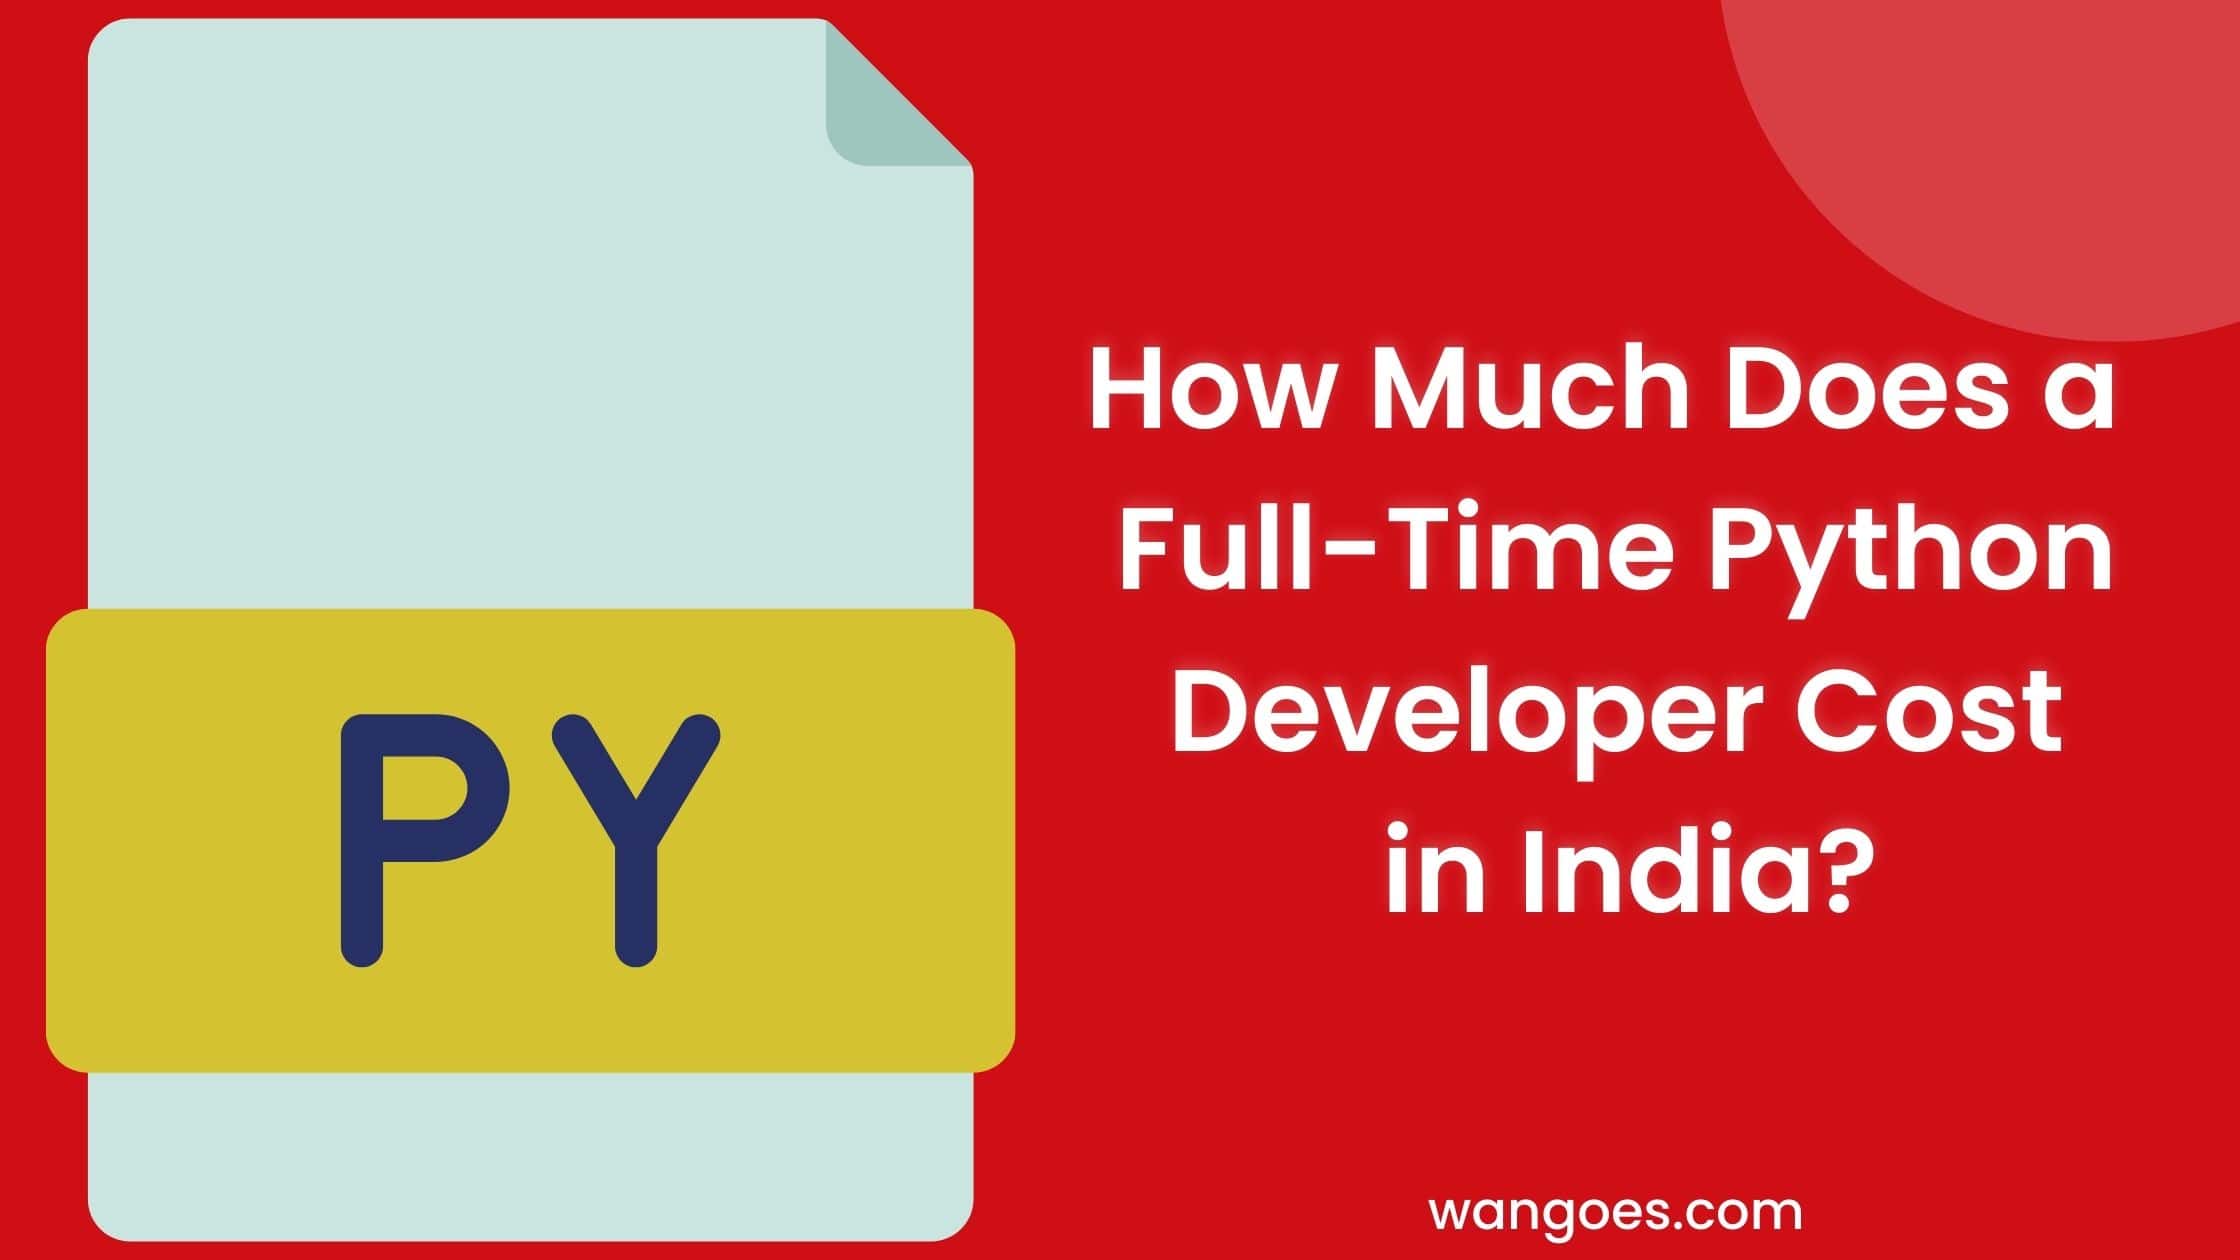 How Much Does a Full-Time Python Developer Cost in India?